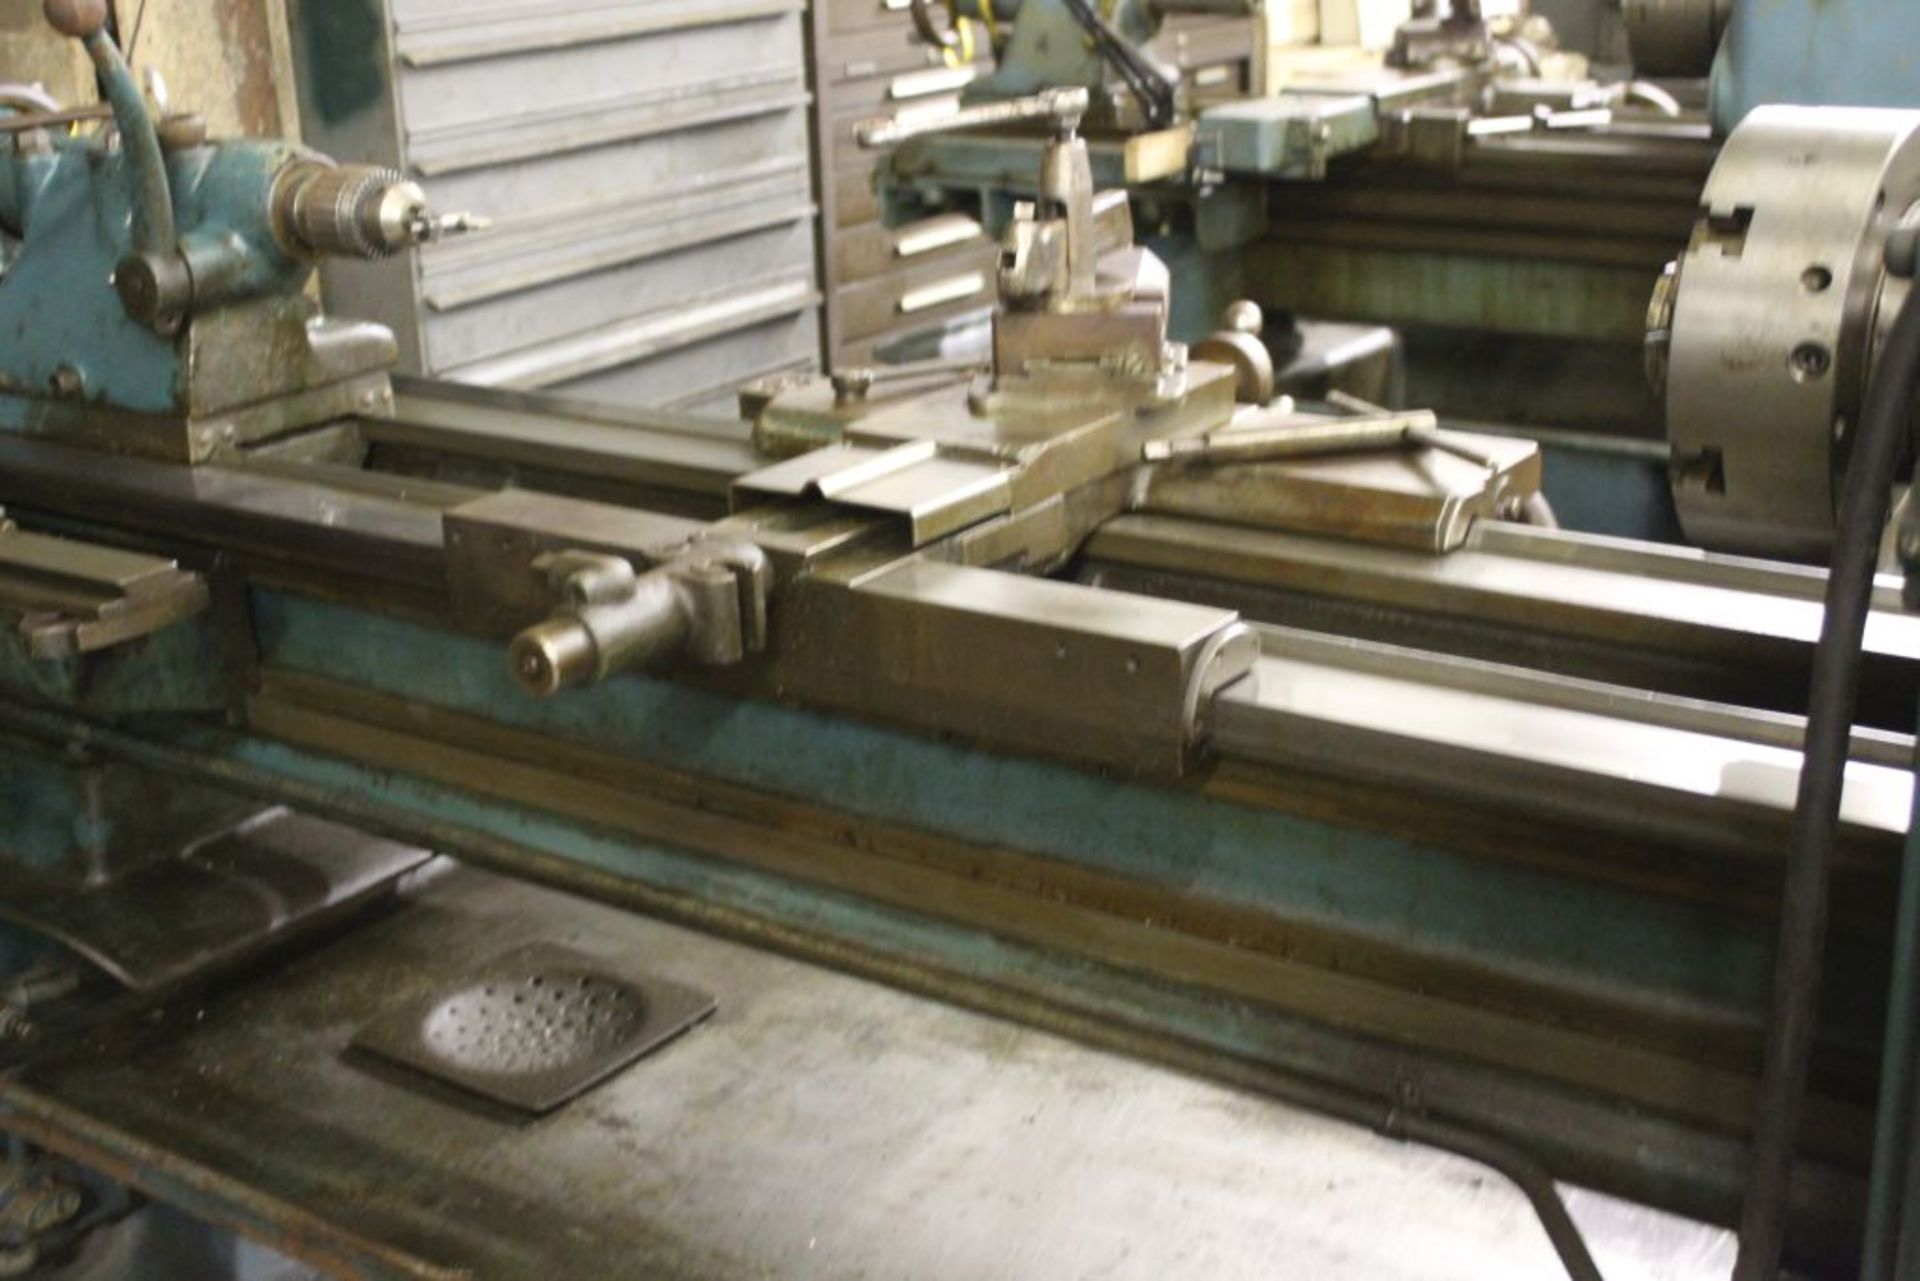 Springfield lathe, sn 52071, 14", 1 3/4" hole, 16" swing, 48" center to center, taper attachment, - Image 11 of 14